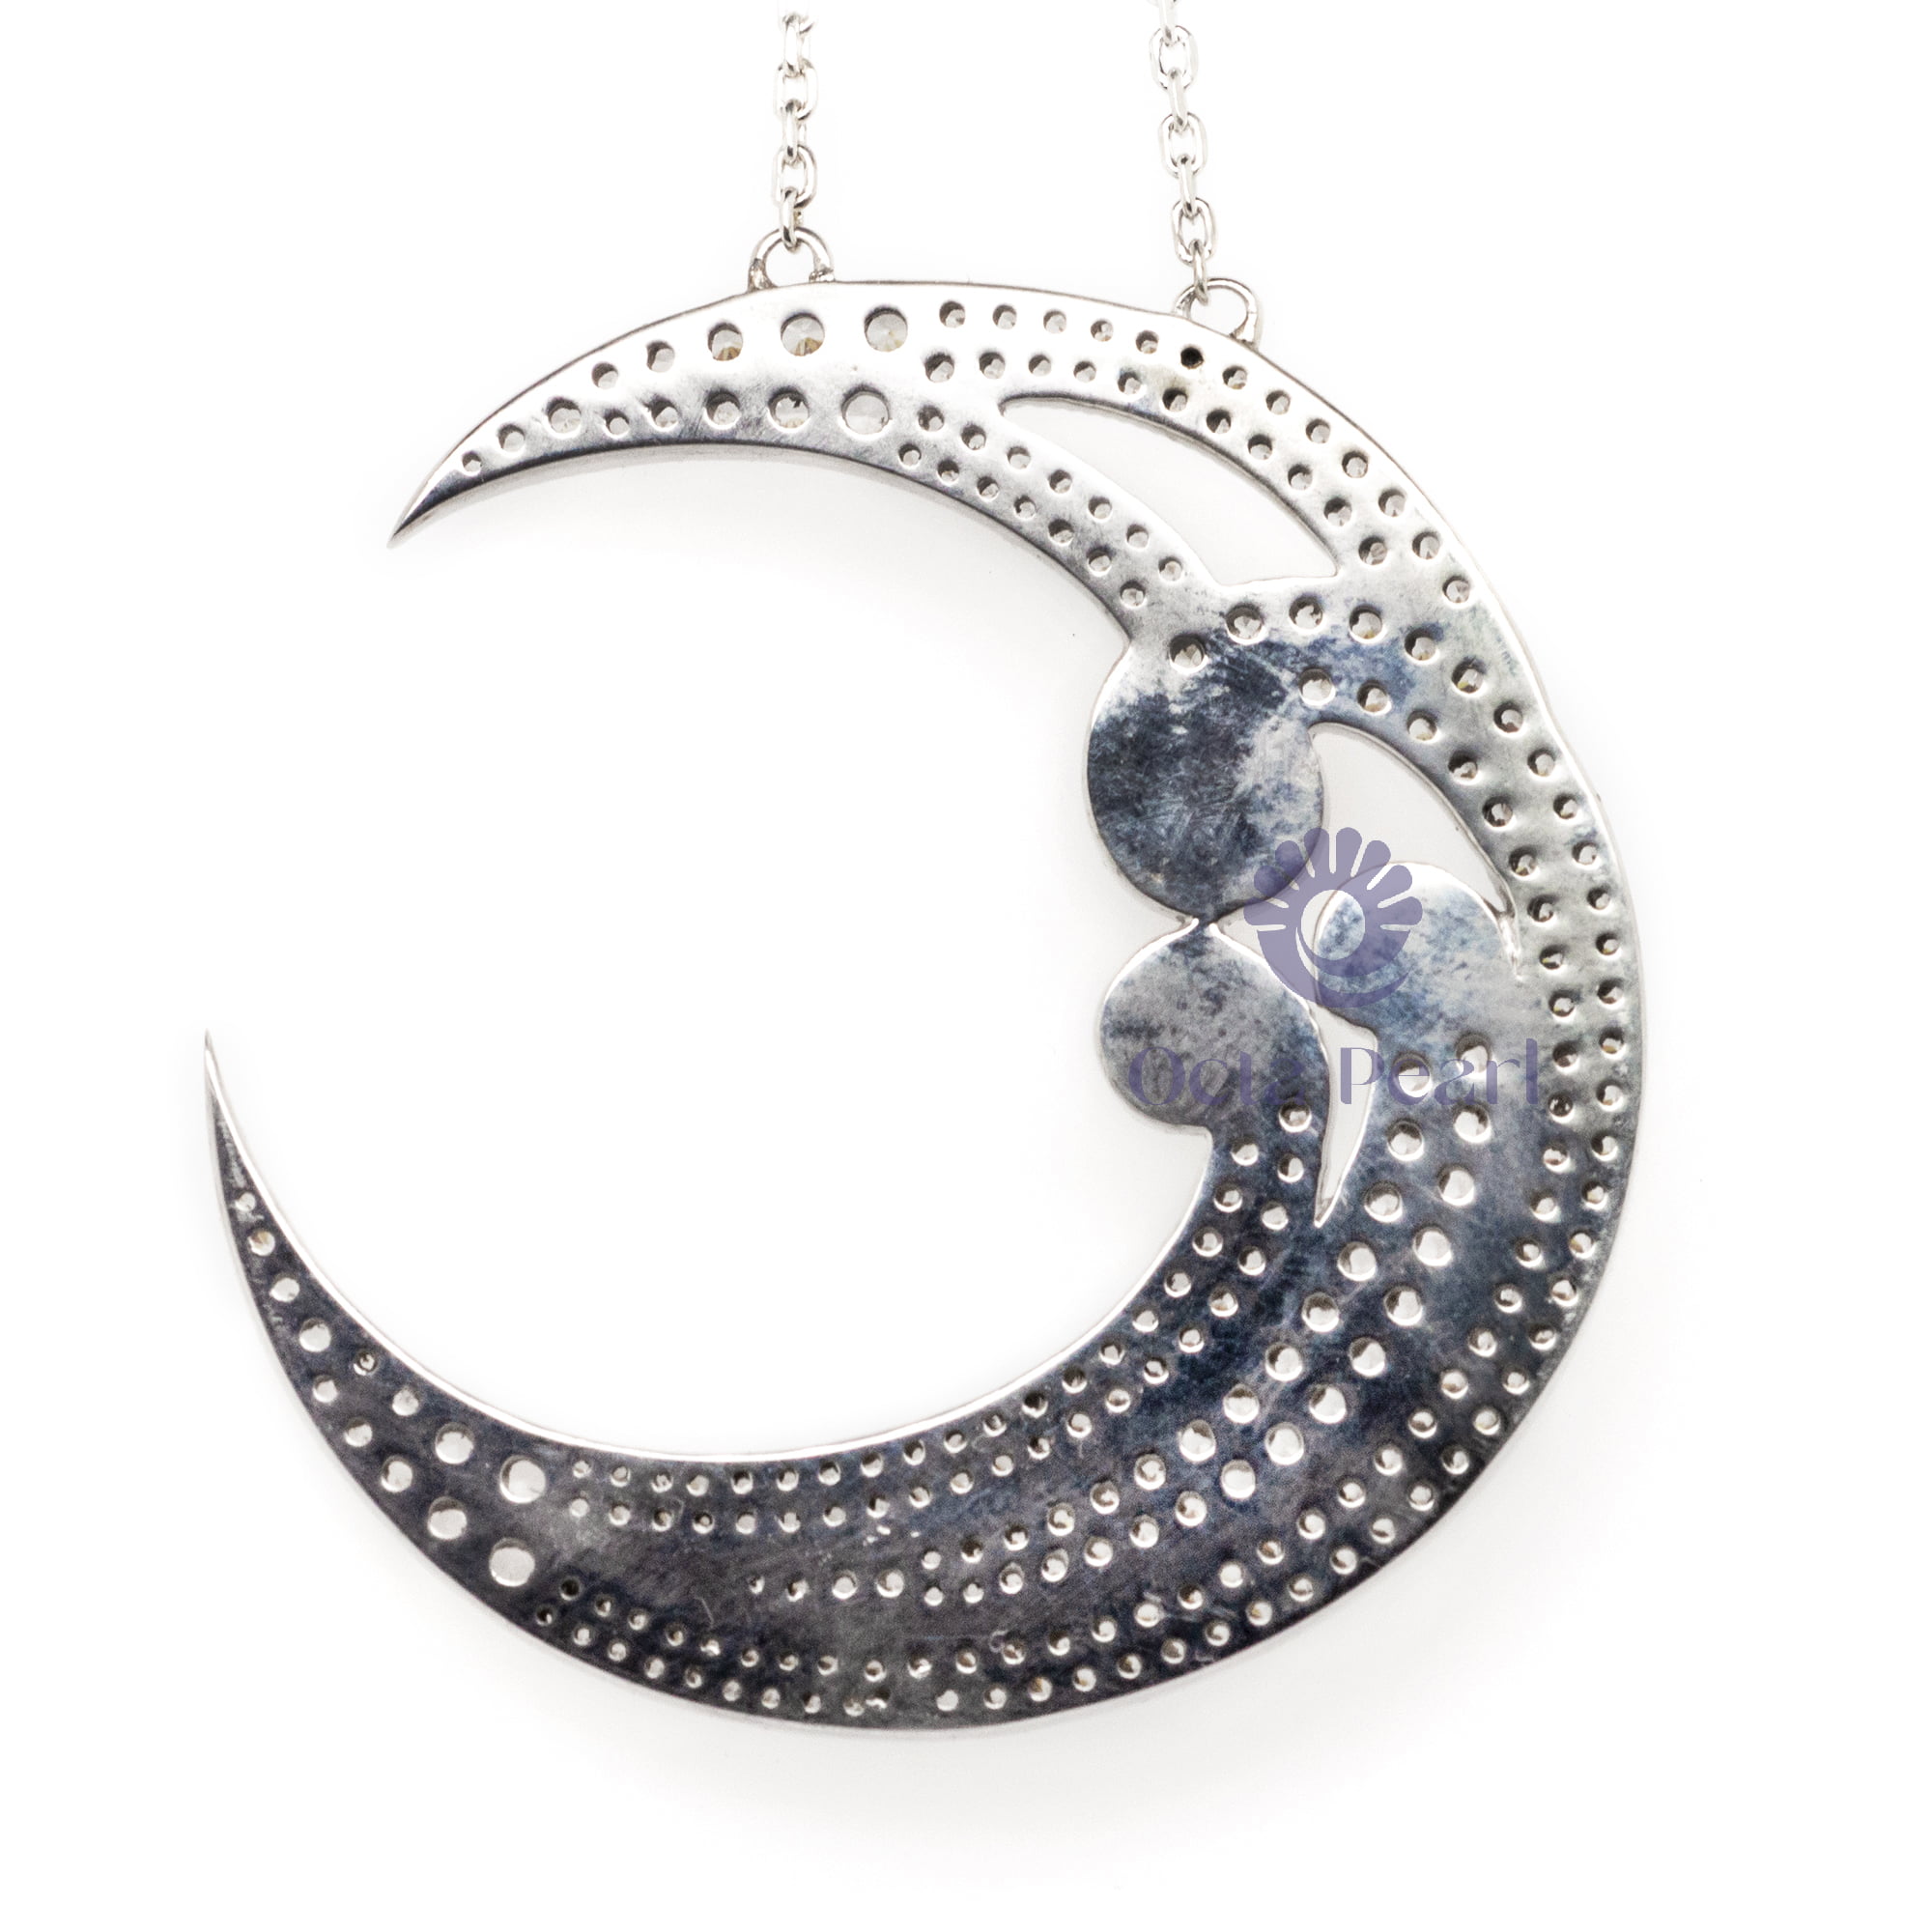 Fancy 3 Half Cabochon With CZ Round Stone Pave Set Beautiful Half Moon Chain Pendant Necklace For Women